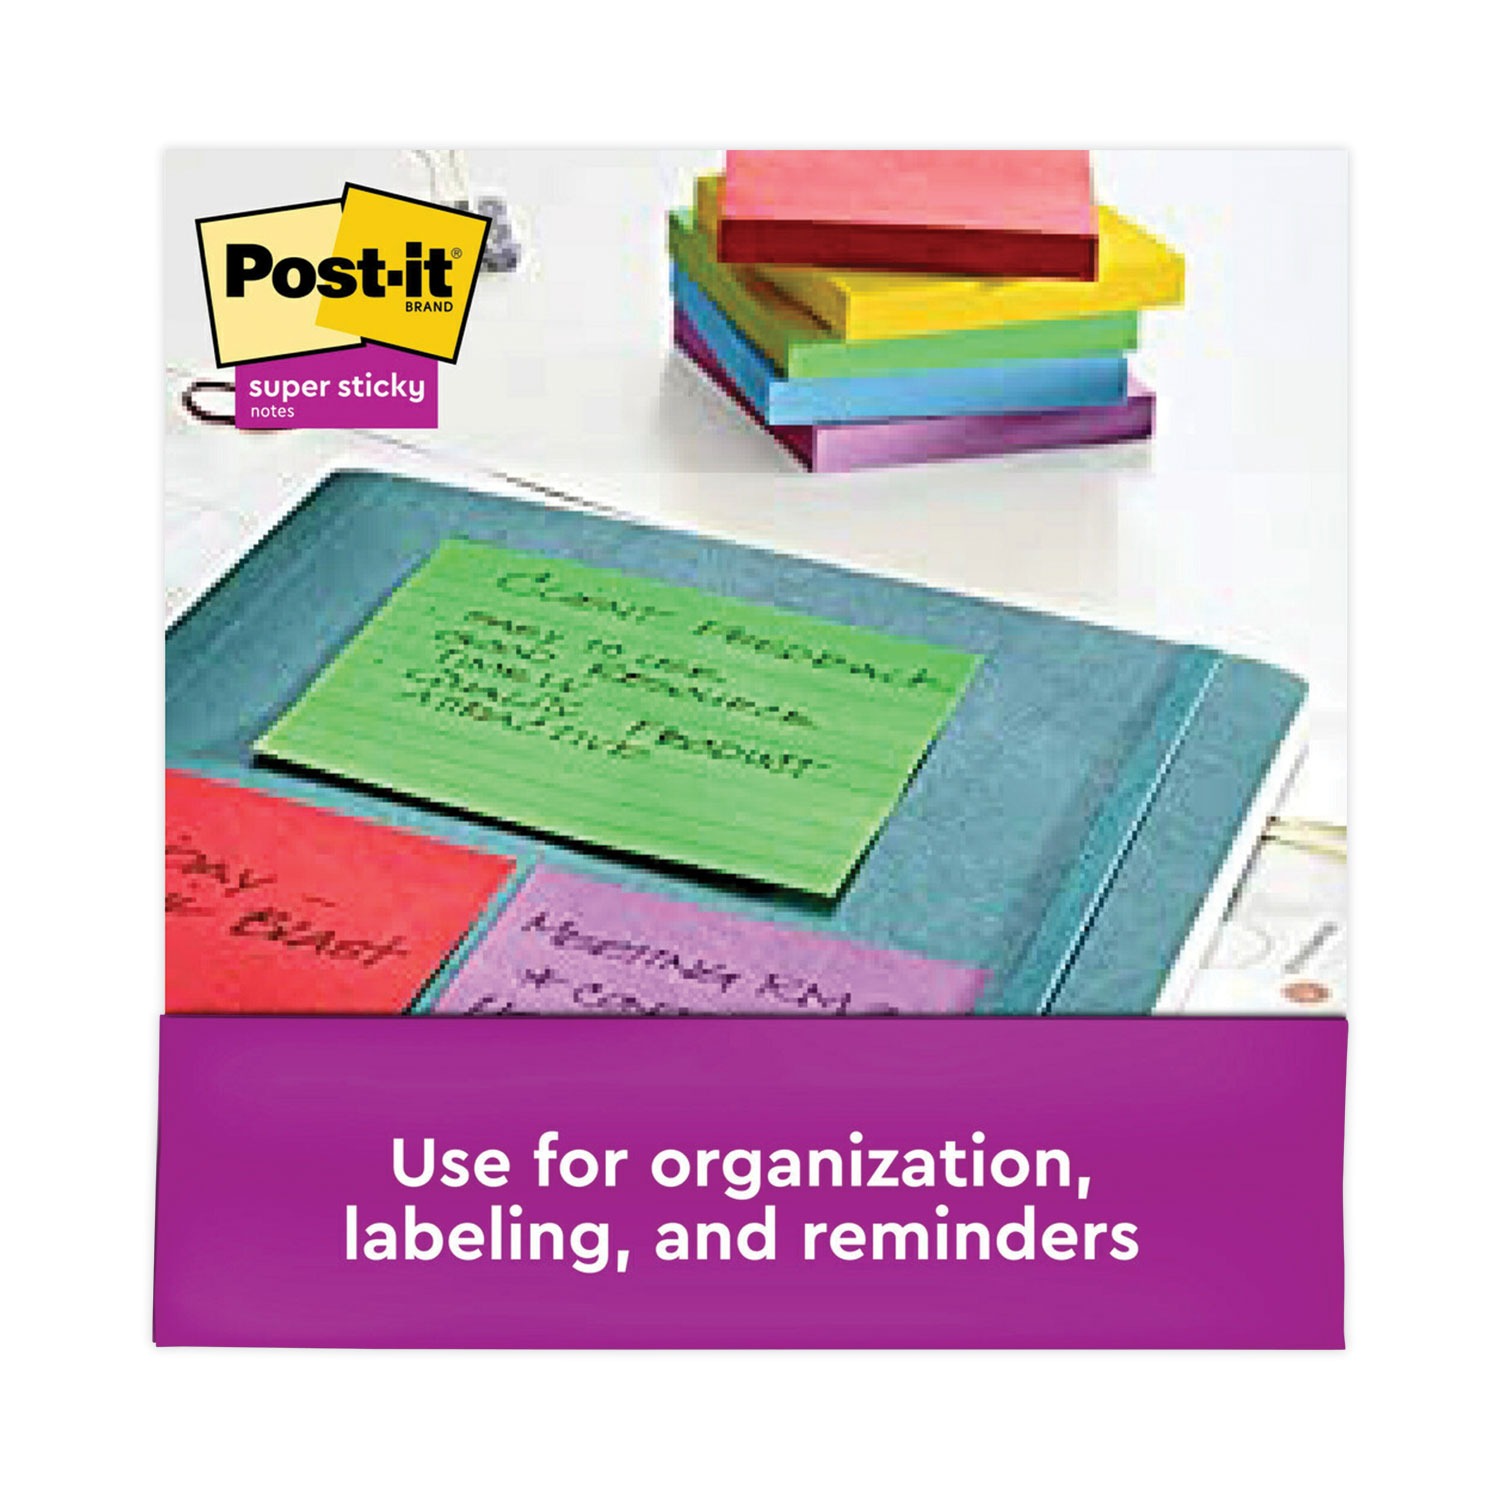 Post-it Super Sticky Notes Pad, Assorted Colors - 90 sheets